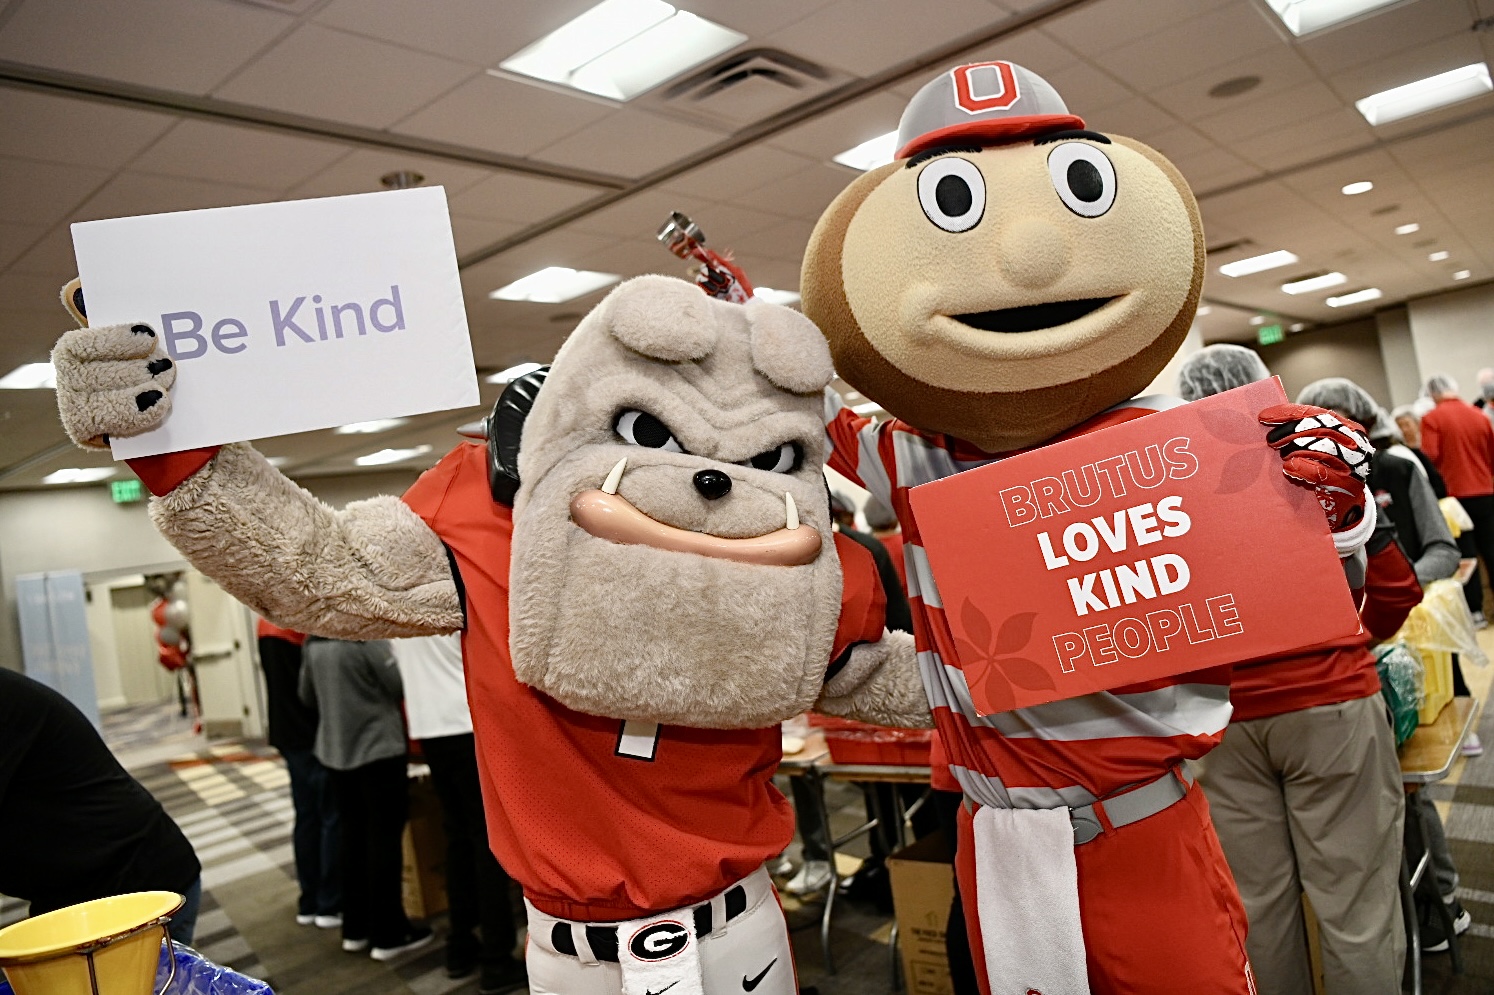 Brutus Buckeye and the University of Georgia Bulldog holding kindness signs at the food packing event in Atlanta.